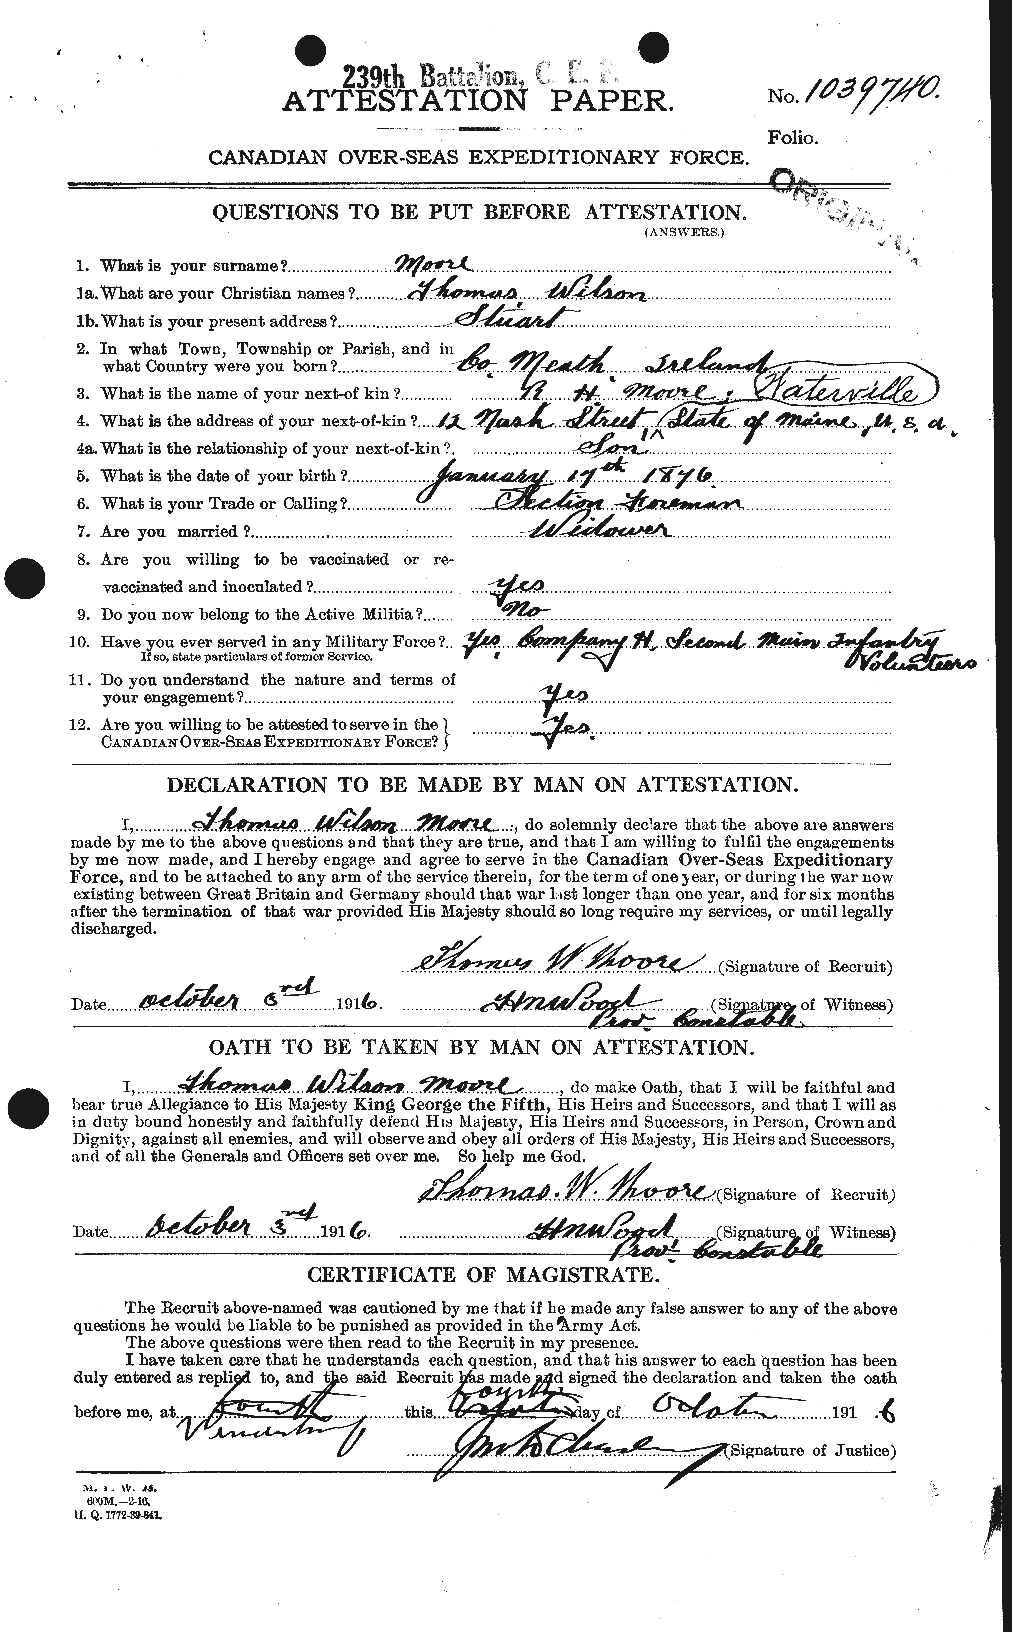 Personnel Records of the First World War - CEF 505678a